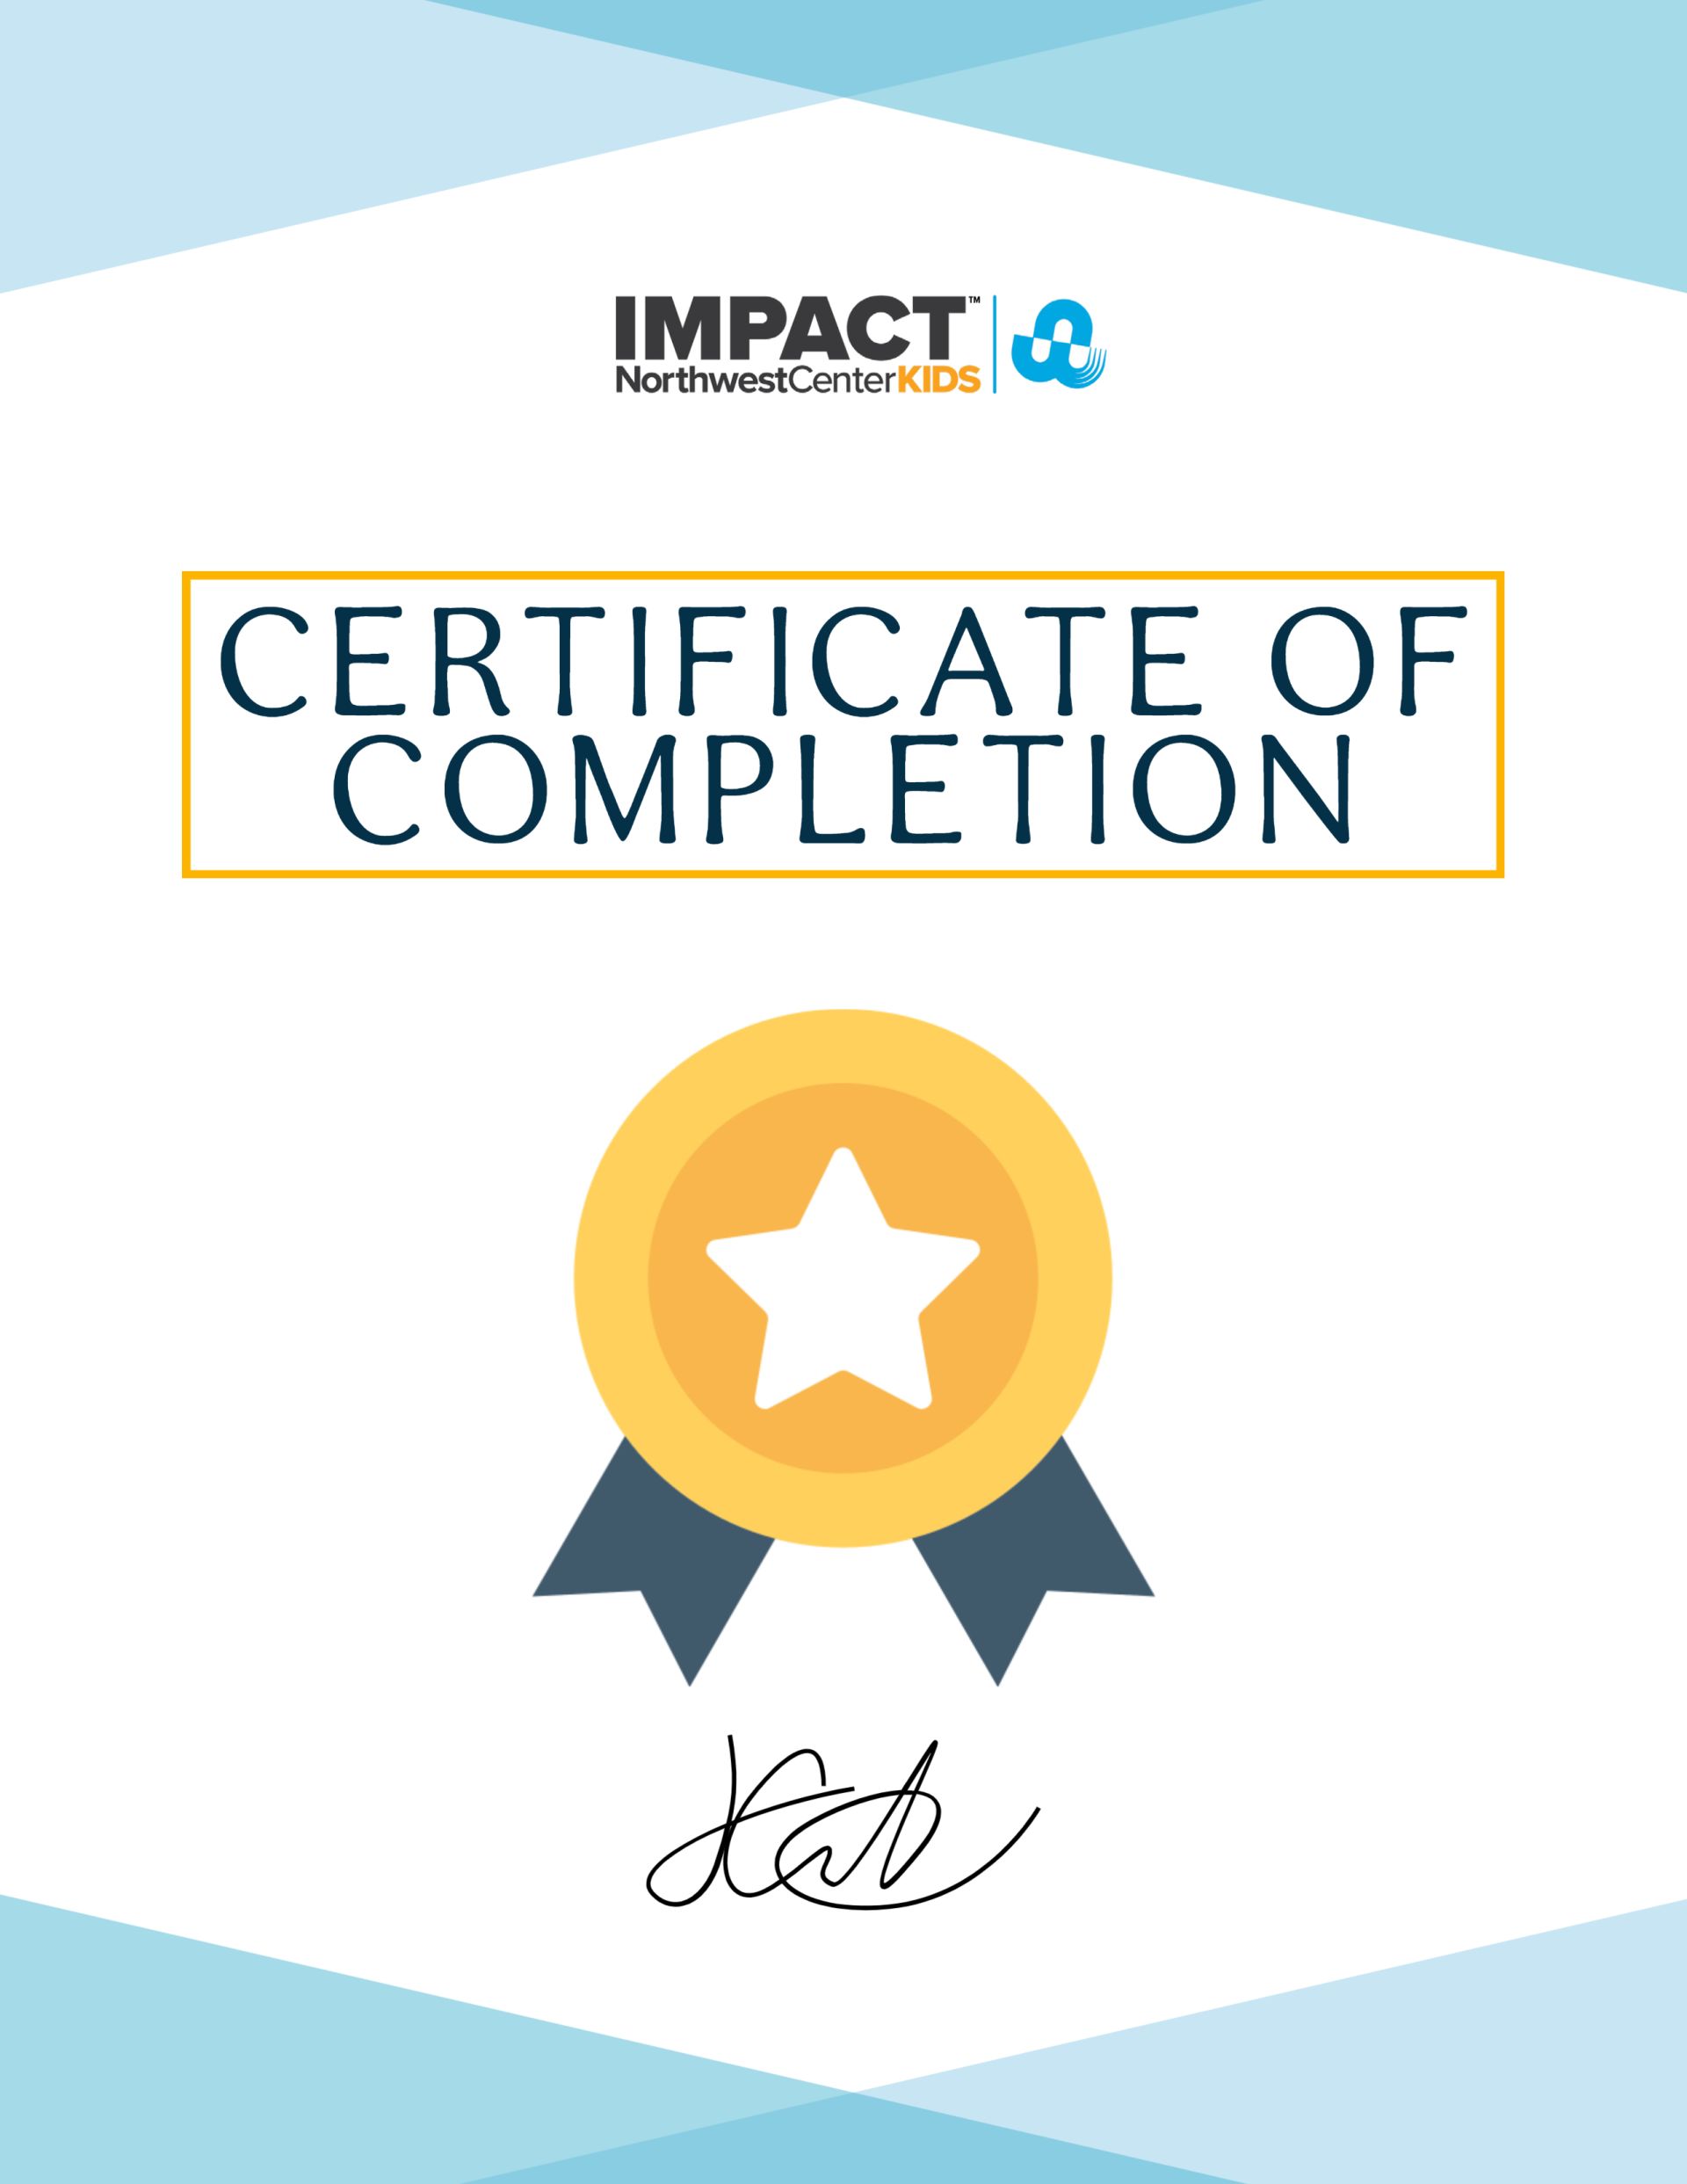 IMPACT's online childcare courses are Merit STARS approved and provide evidence-based early childhood education training.